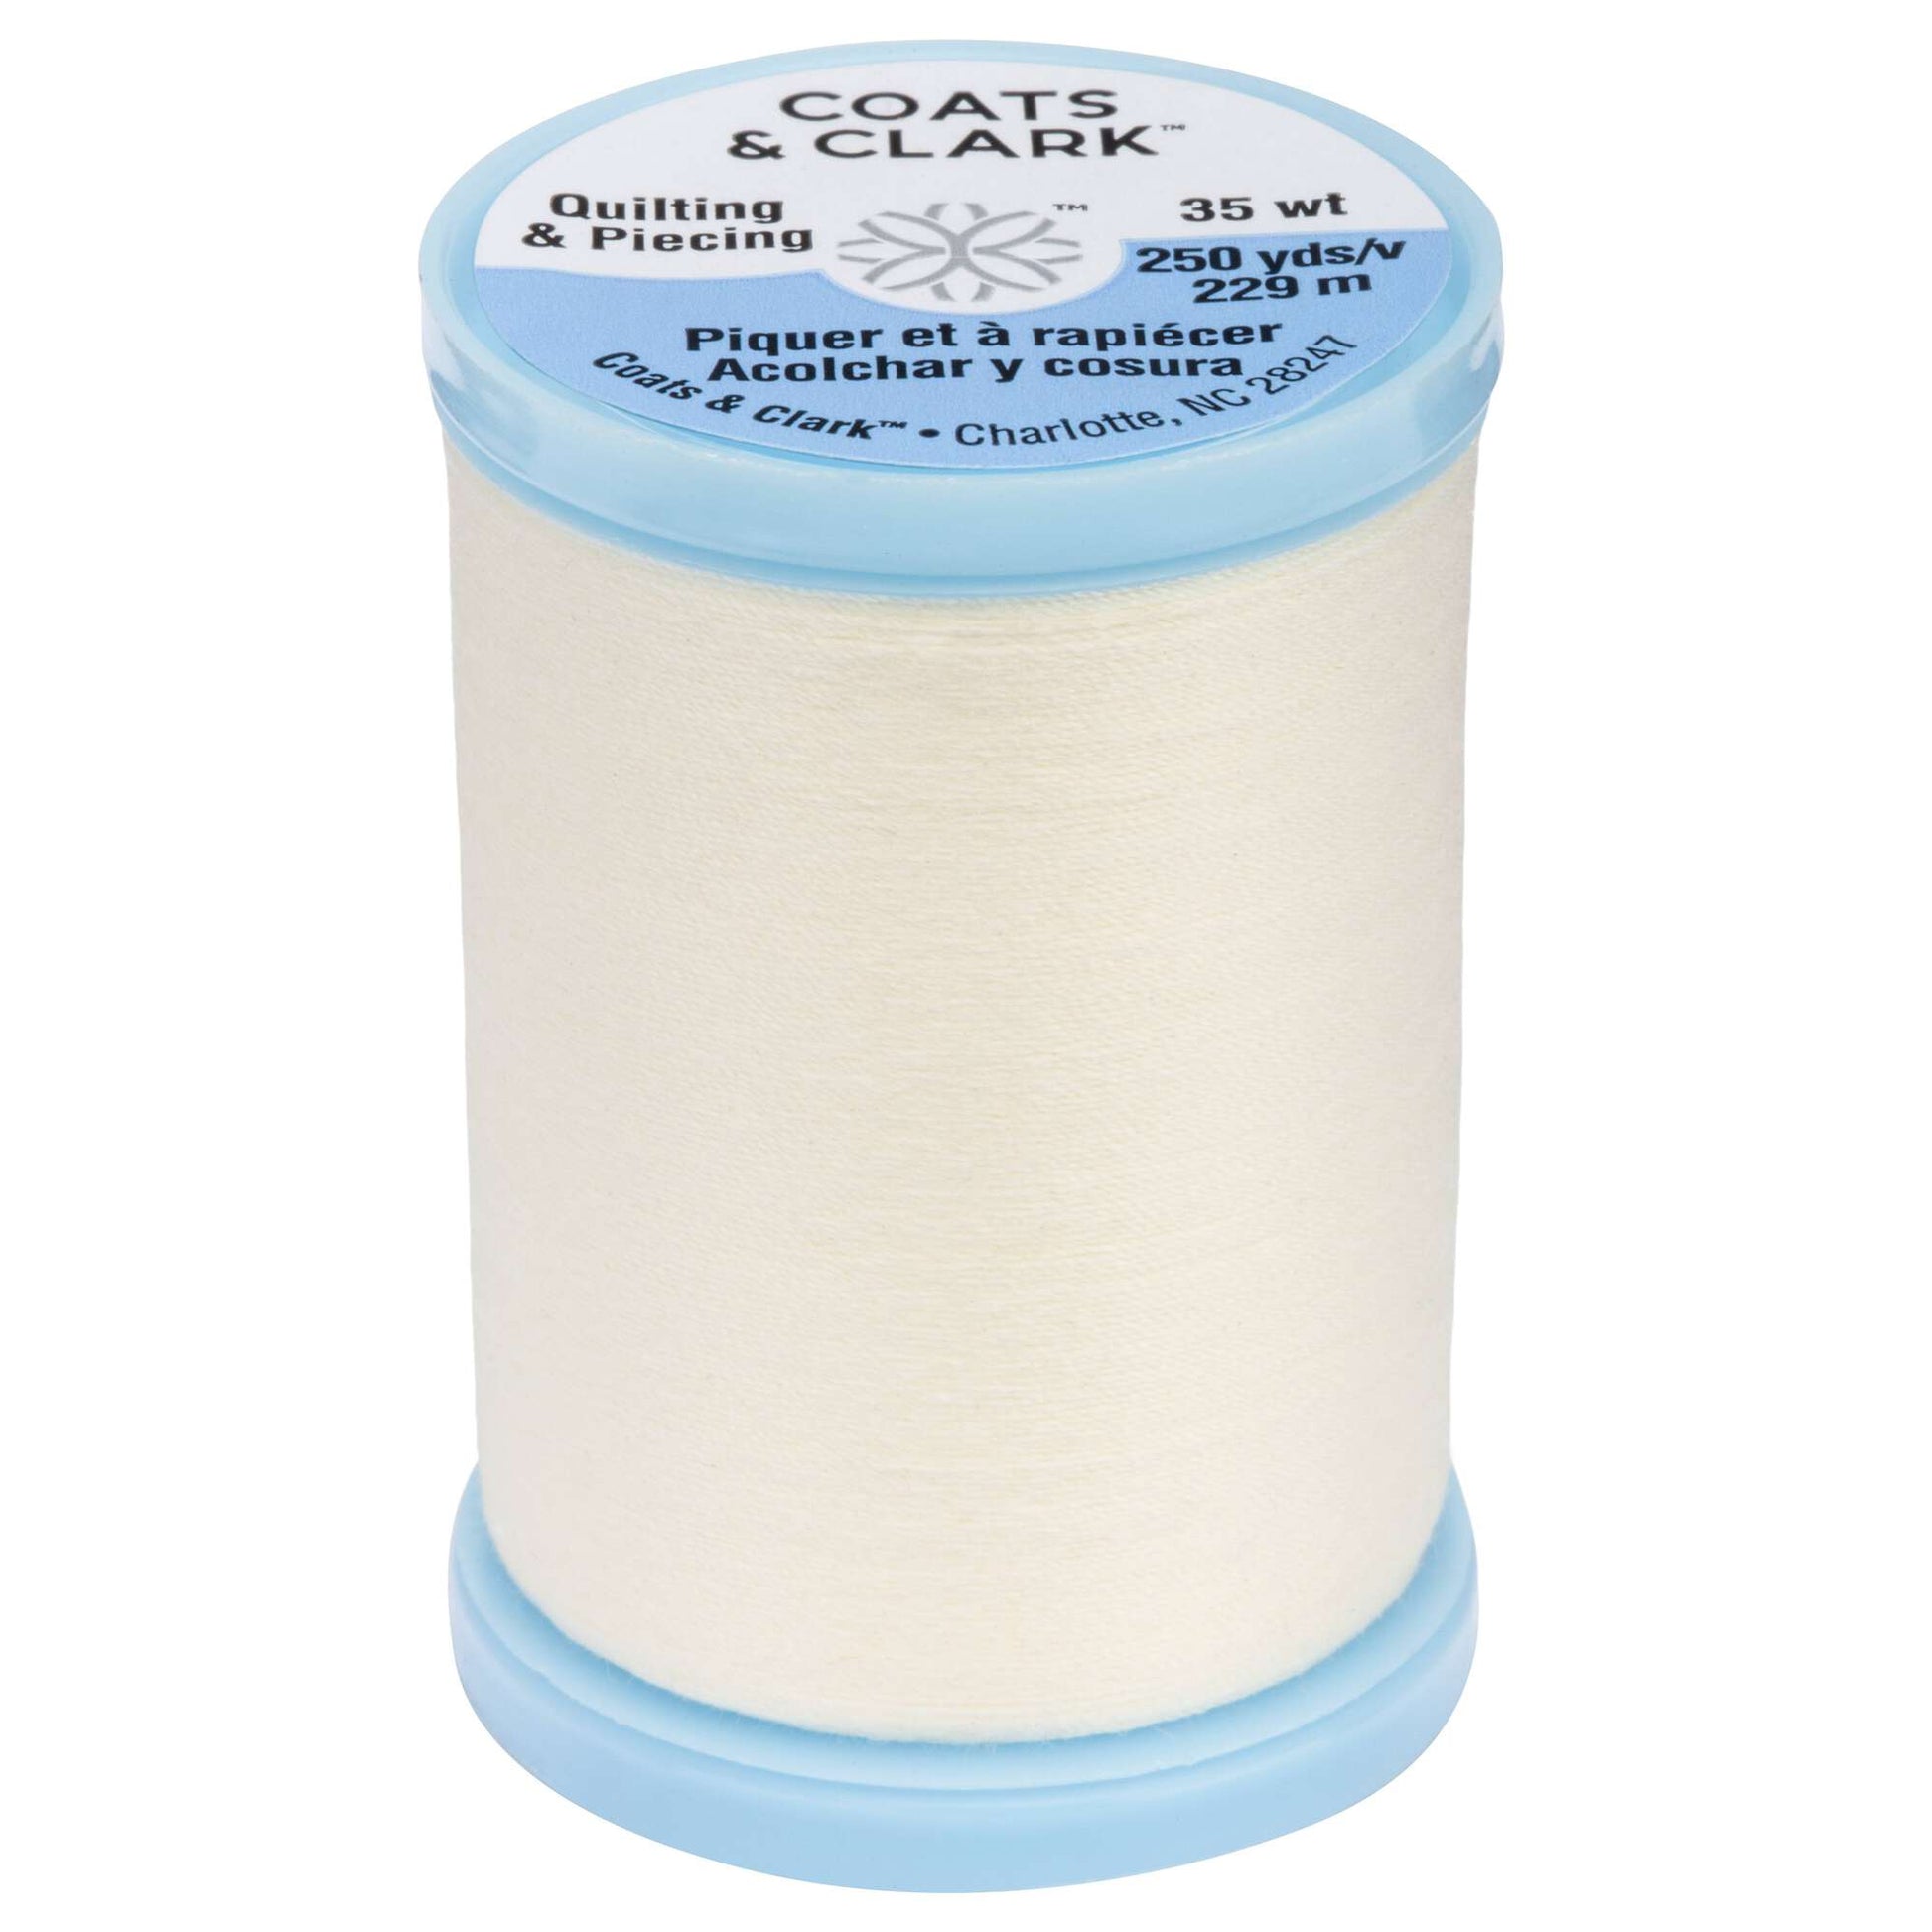 Coats & Clark Cotton Covered Quilting & Piecing Thread (250 Yards)